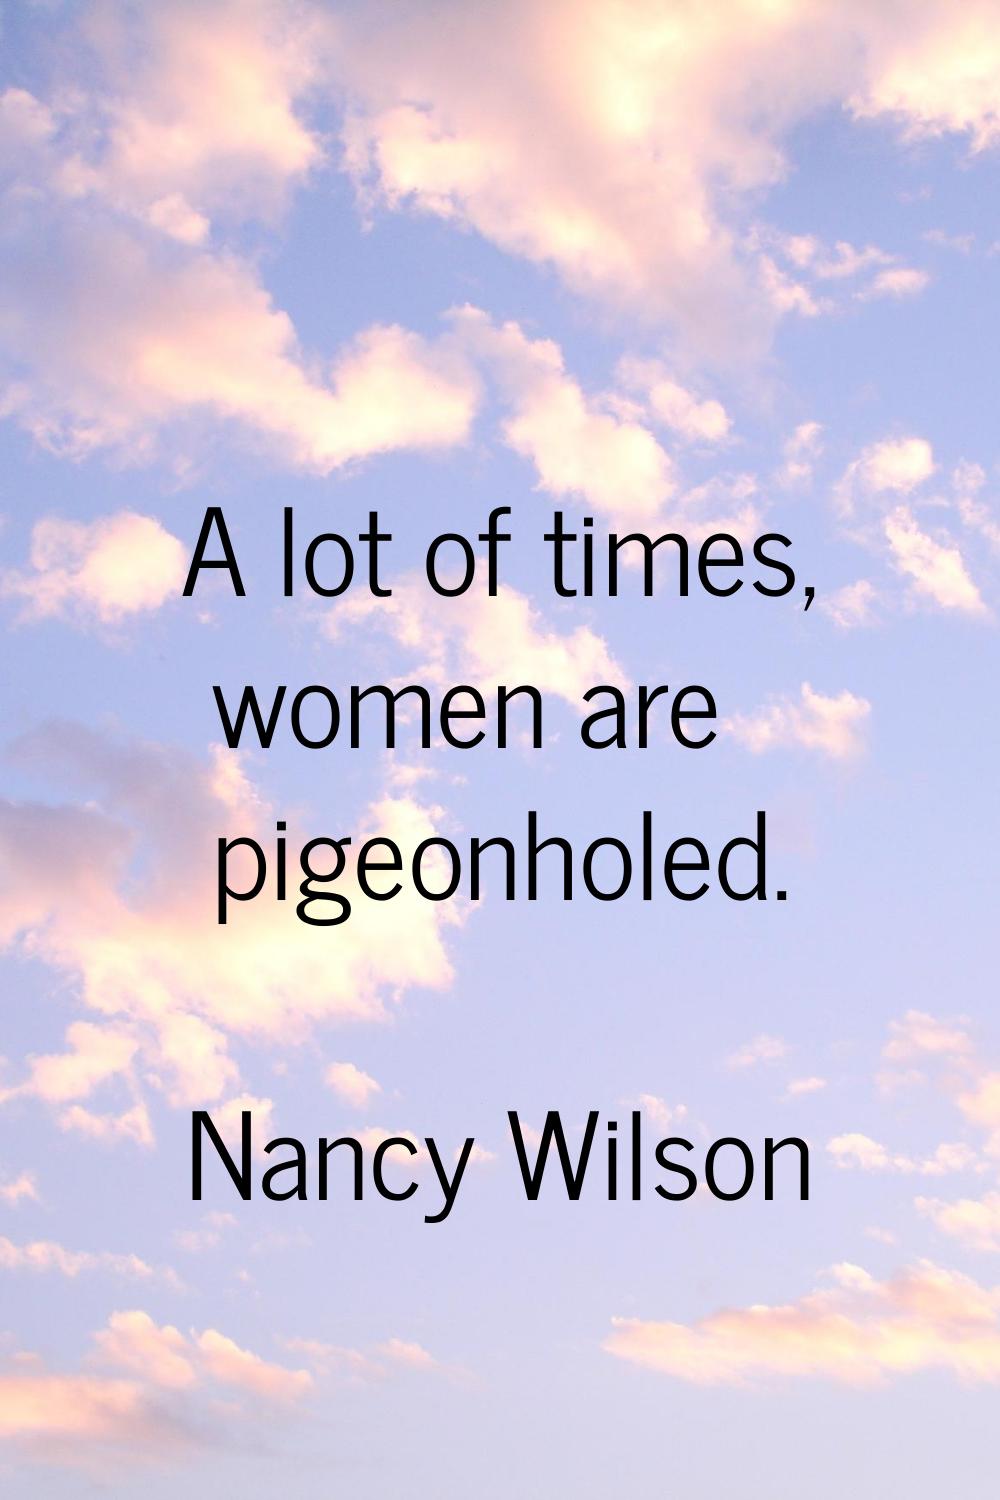 A lot of times, women are pigeonholed.